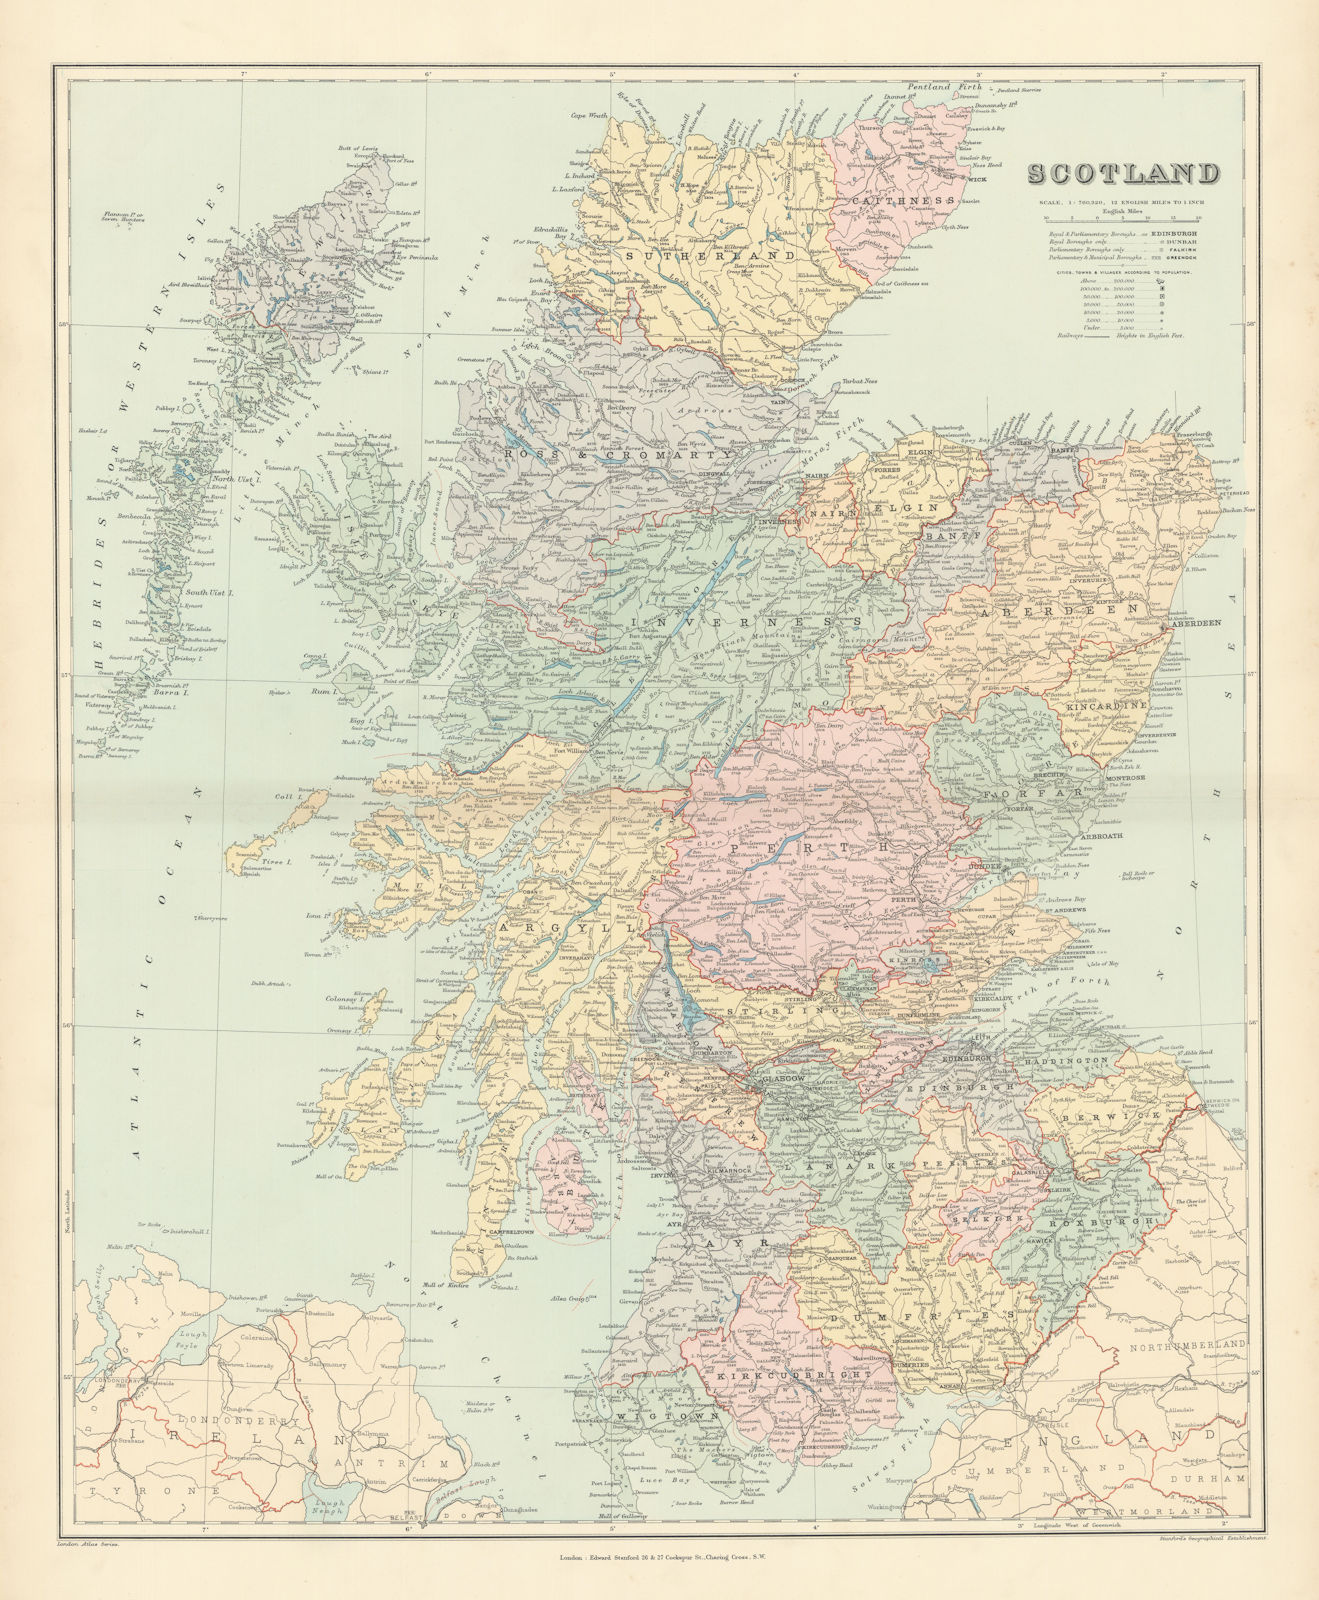 Associate Product Scotland. Counties & railways. Large 66x54cm. STANFORD 1896 old antique map